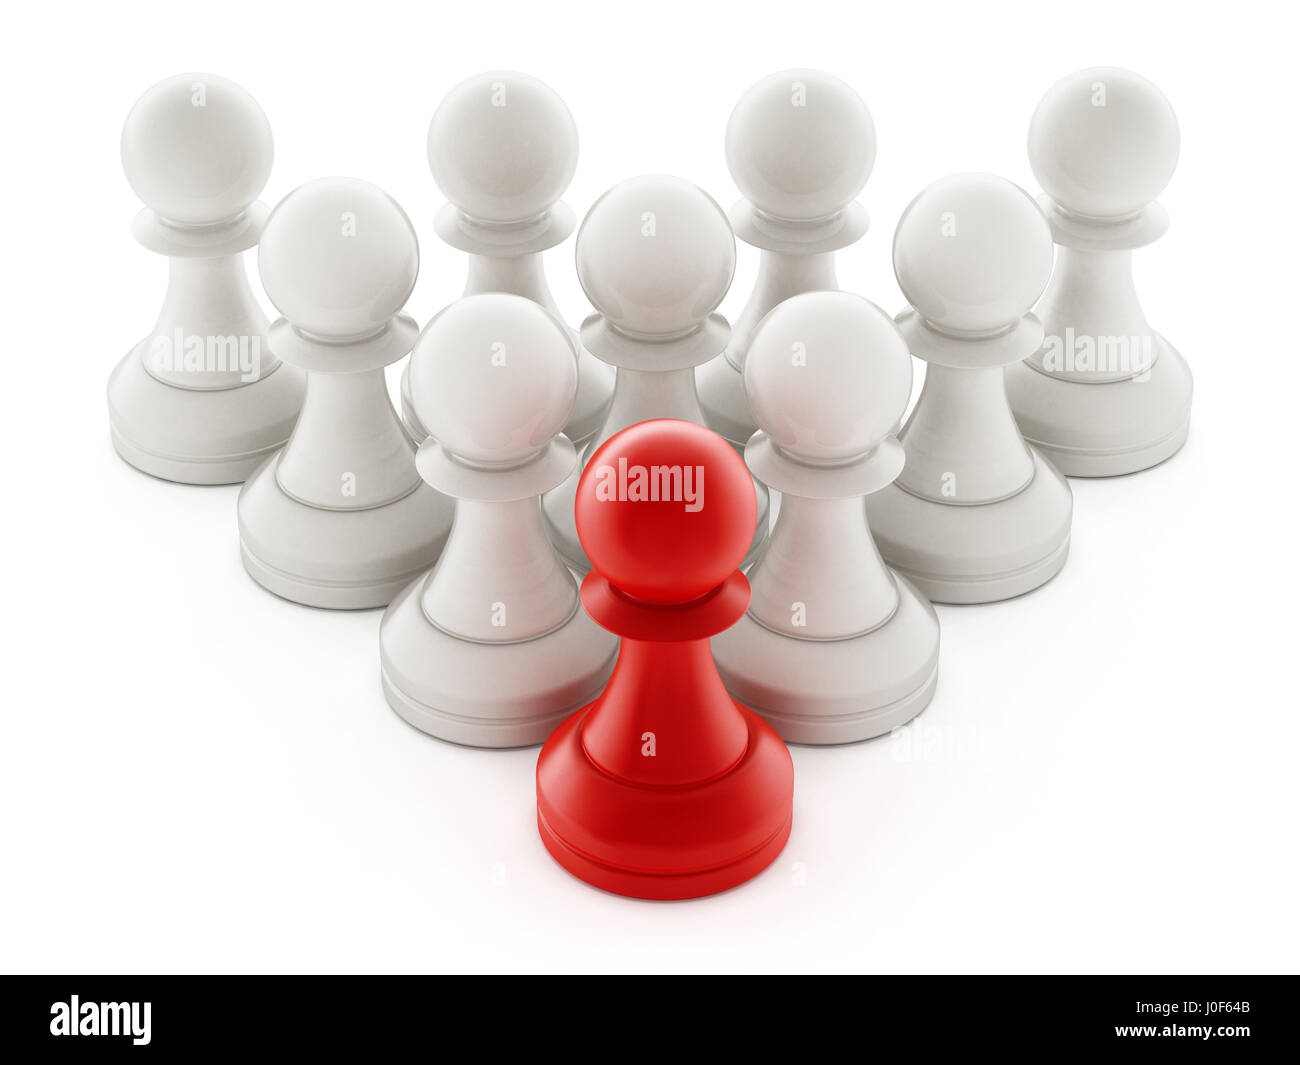 Red chess pawn standing ahead of white pawns. 3D illustration. Stock Photo